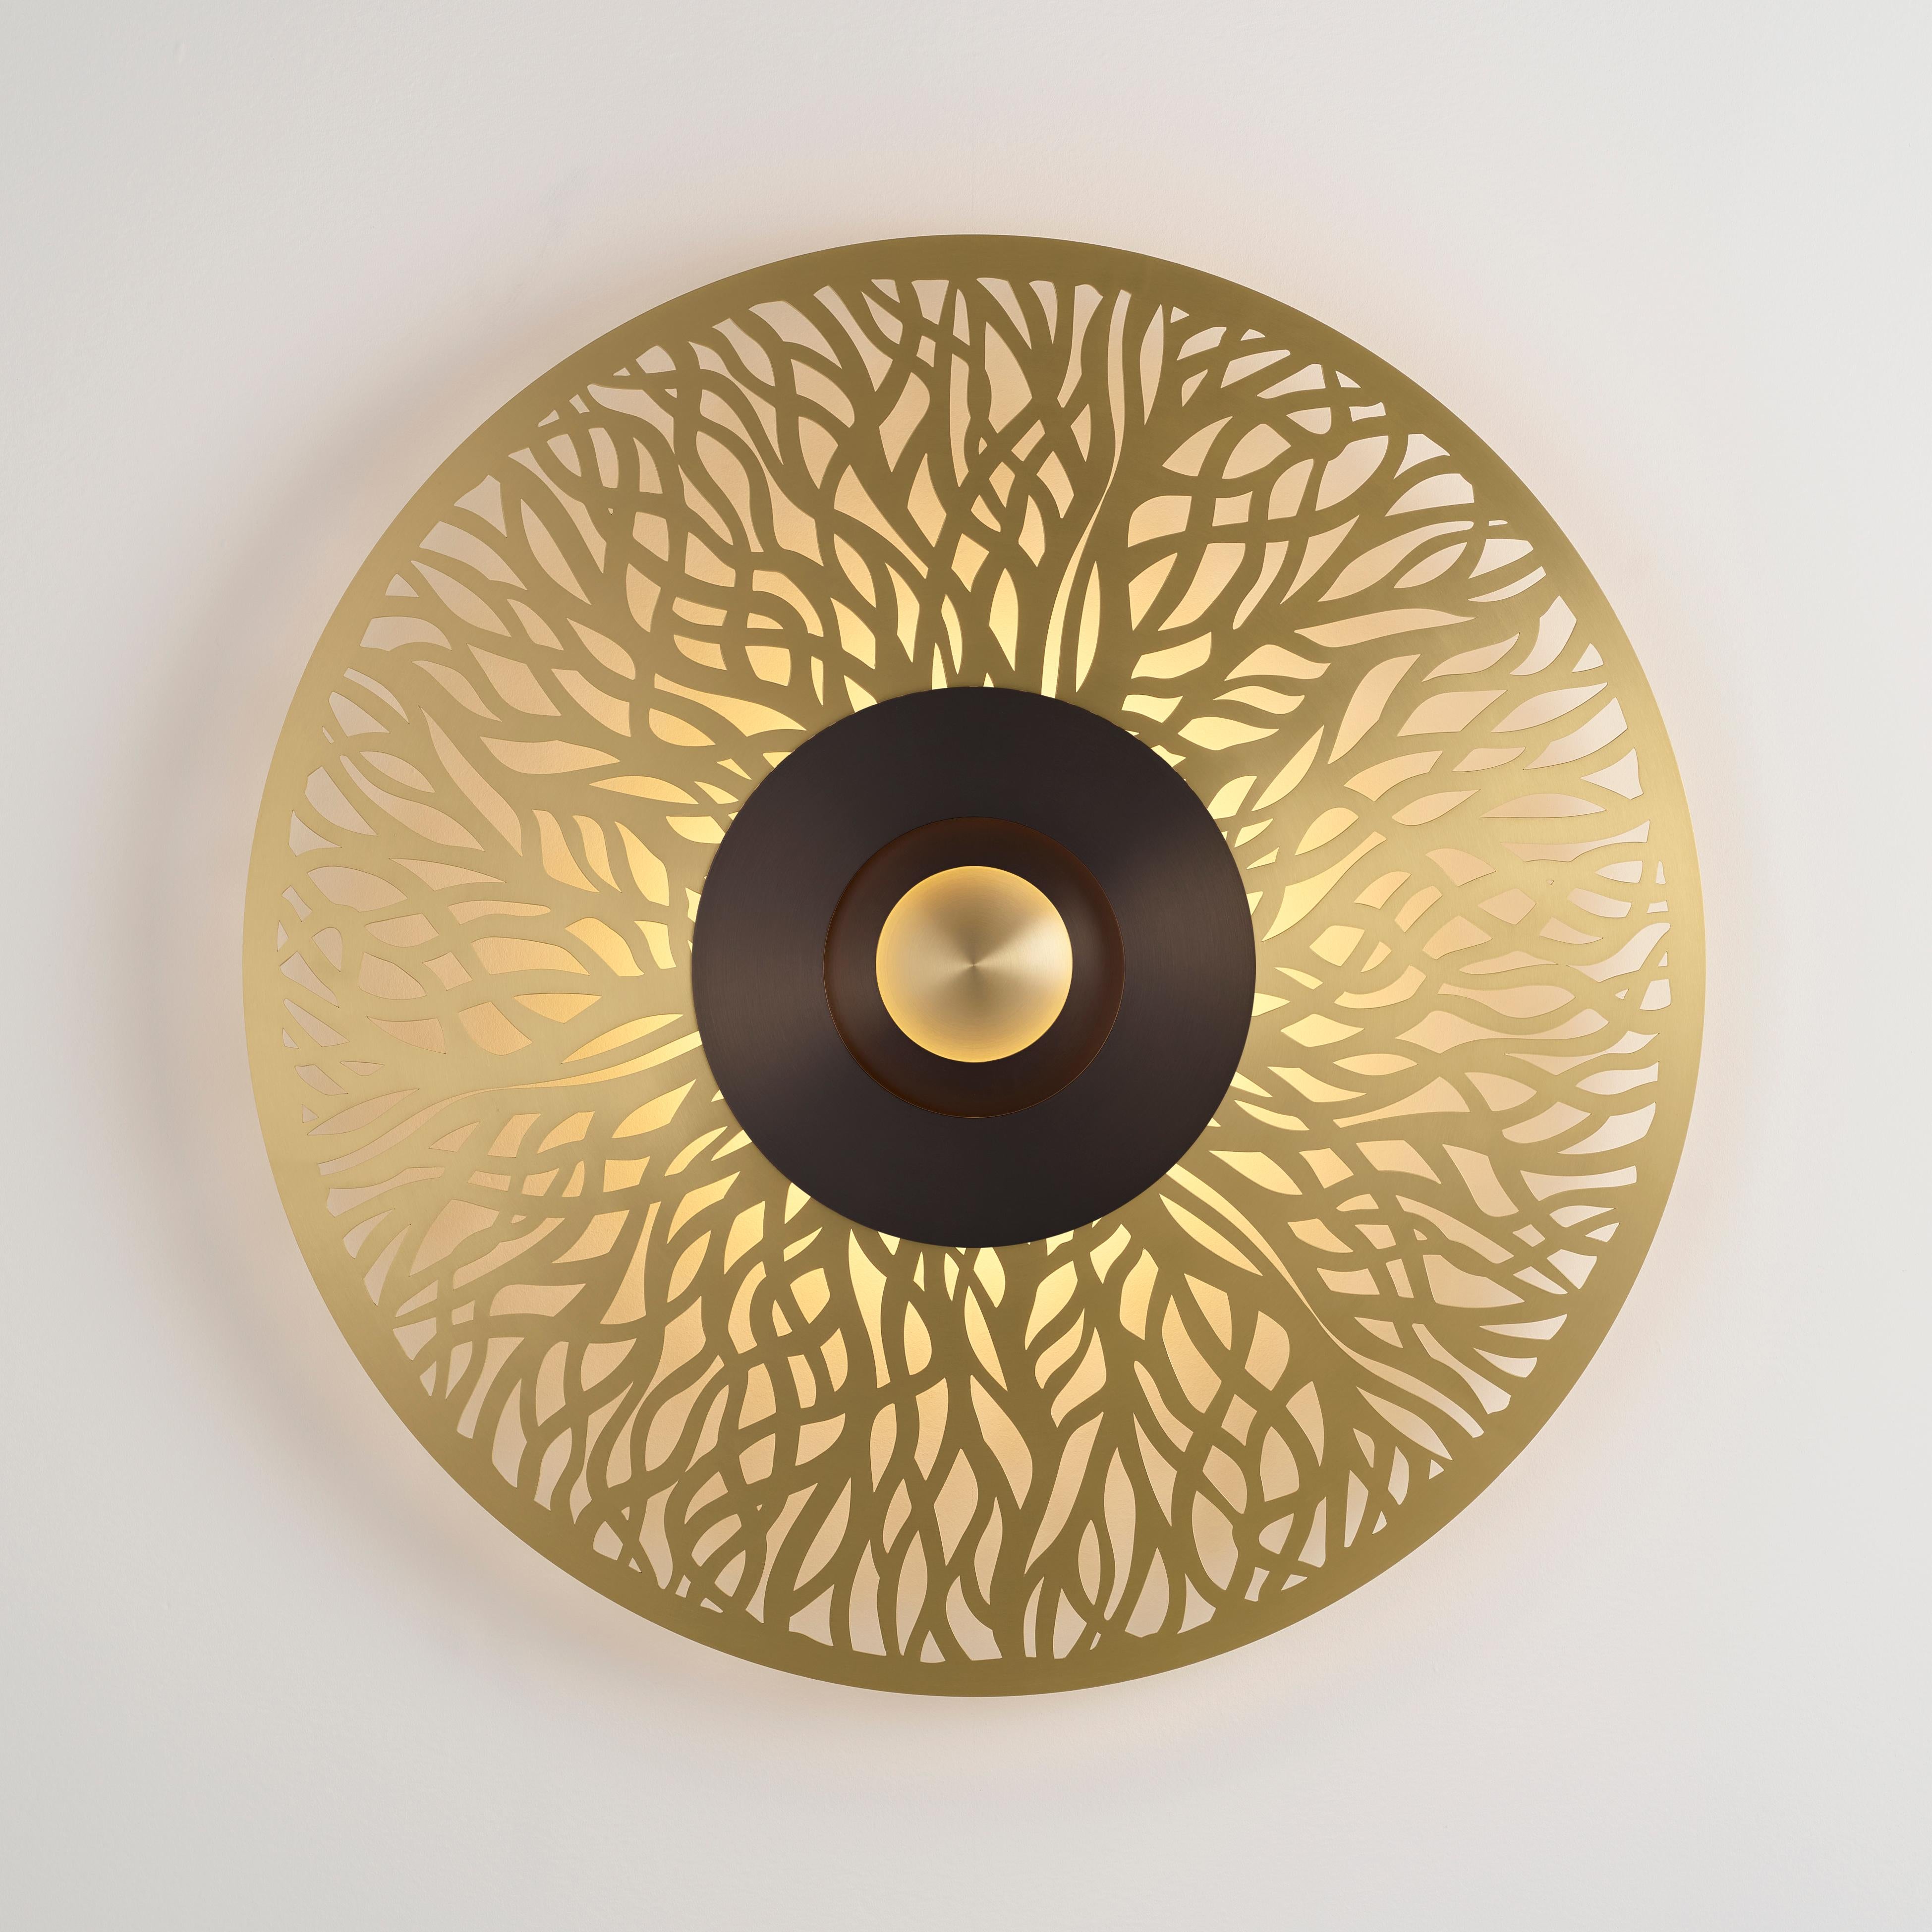 Atmos Racine Wall Light by Emilie Cathelineau
Dimensions: D 83.7 cm
Materials: Solid brass, Polycarbonate diffuser.
Others finishes and dimensions are available.

All our lamps can be wired according to each country. If sold to the USA it will